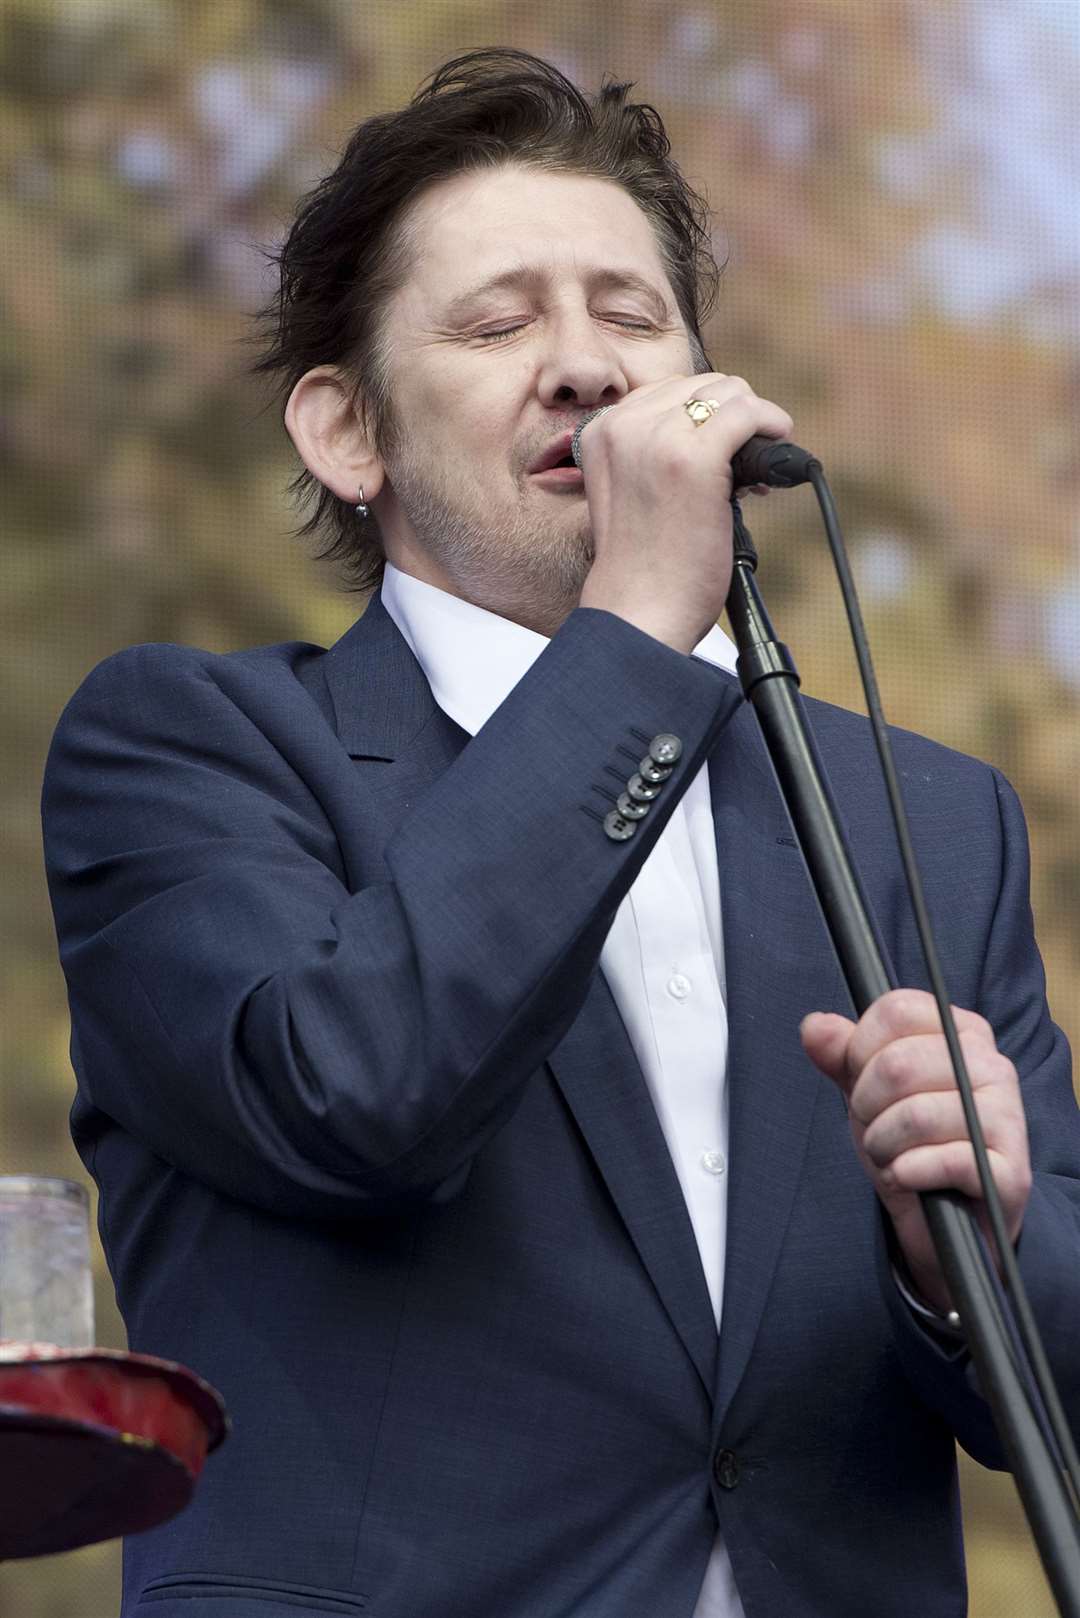 The late Shane MacGowan, lead singer of The Pogues (Laura Lean/PA)